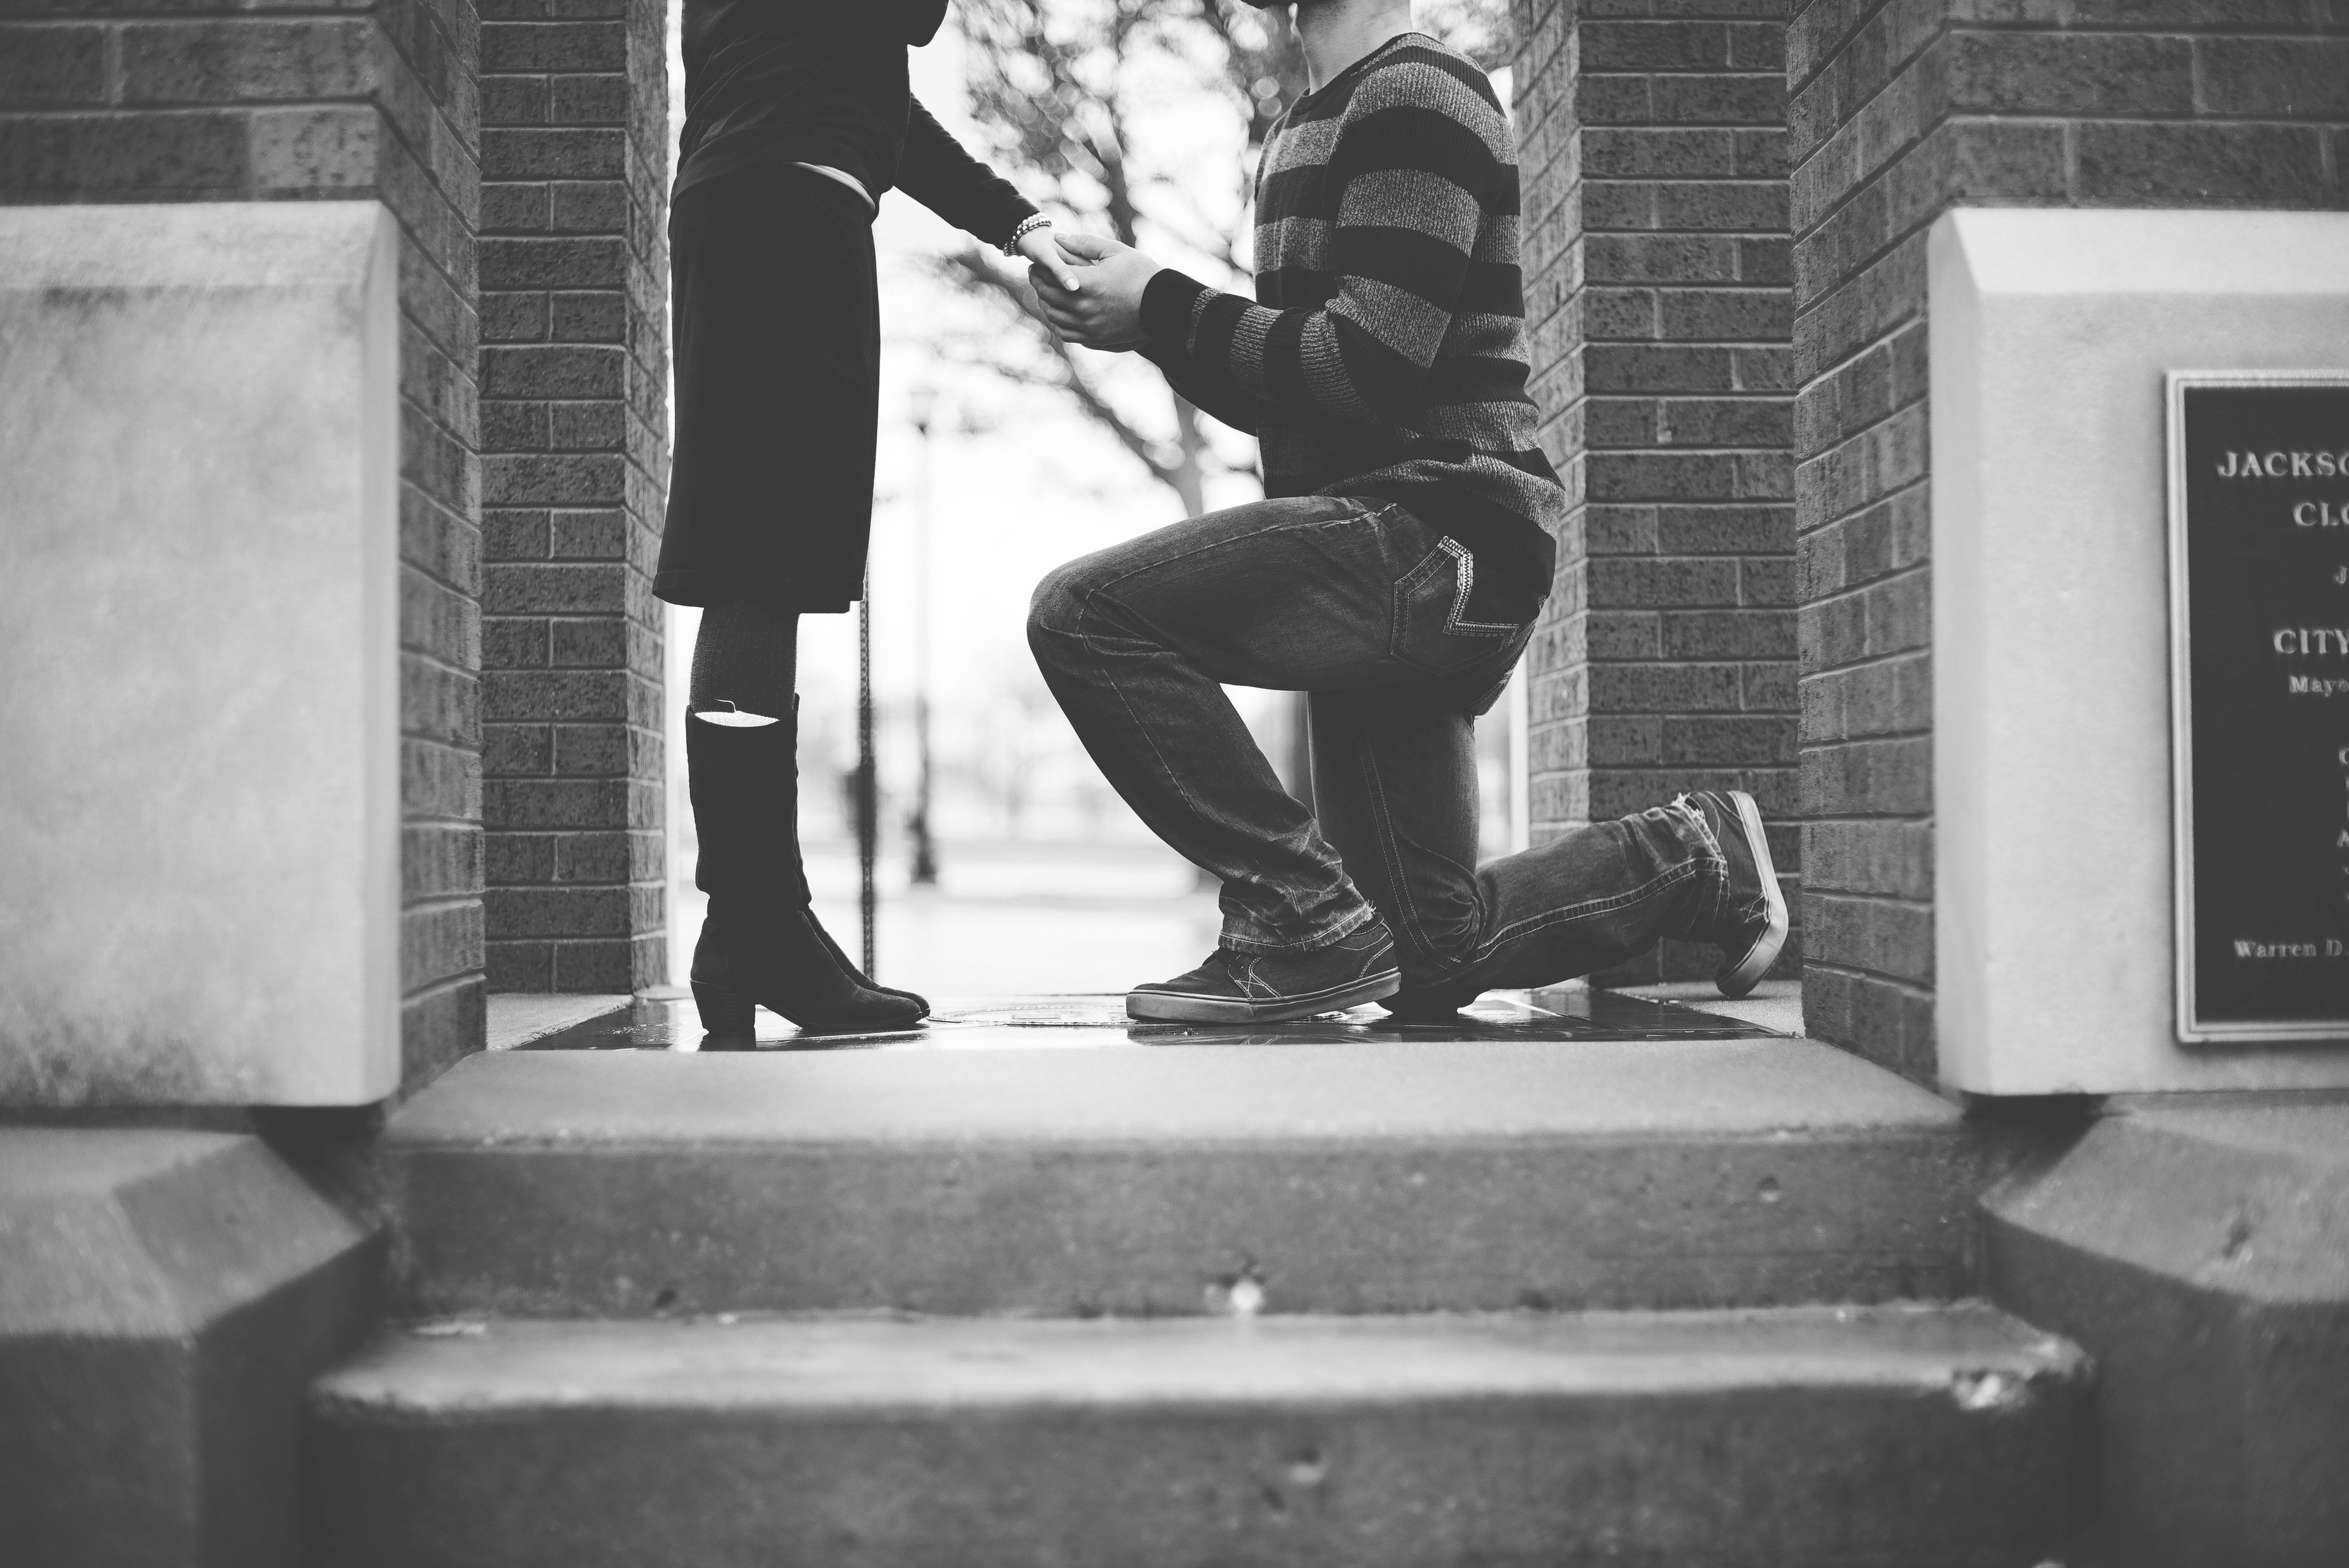 5 Proposal Ideas for the Holidays